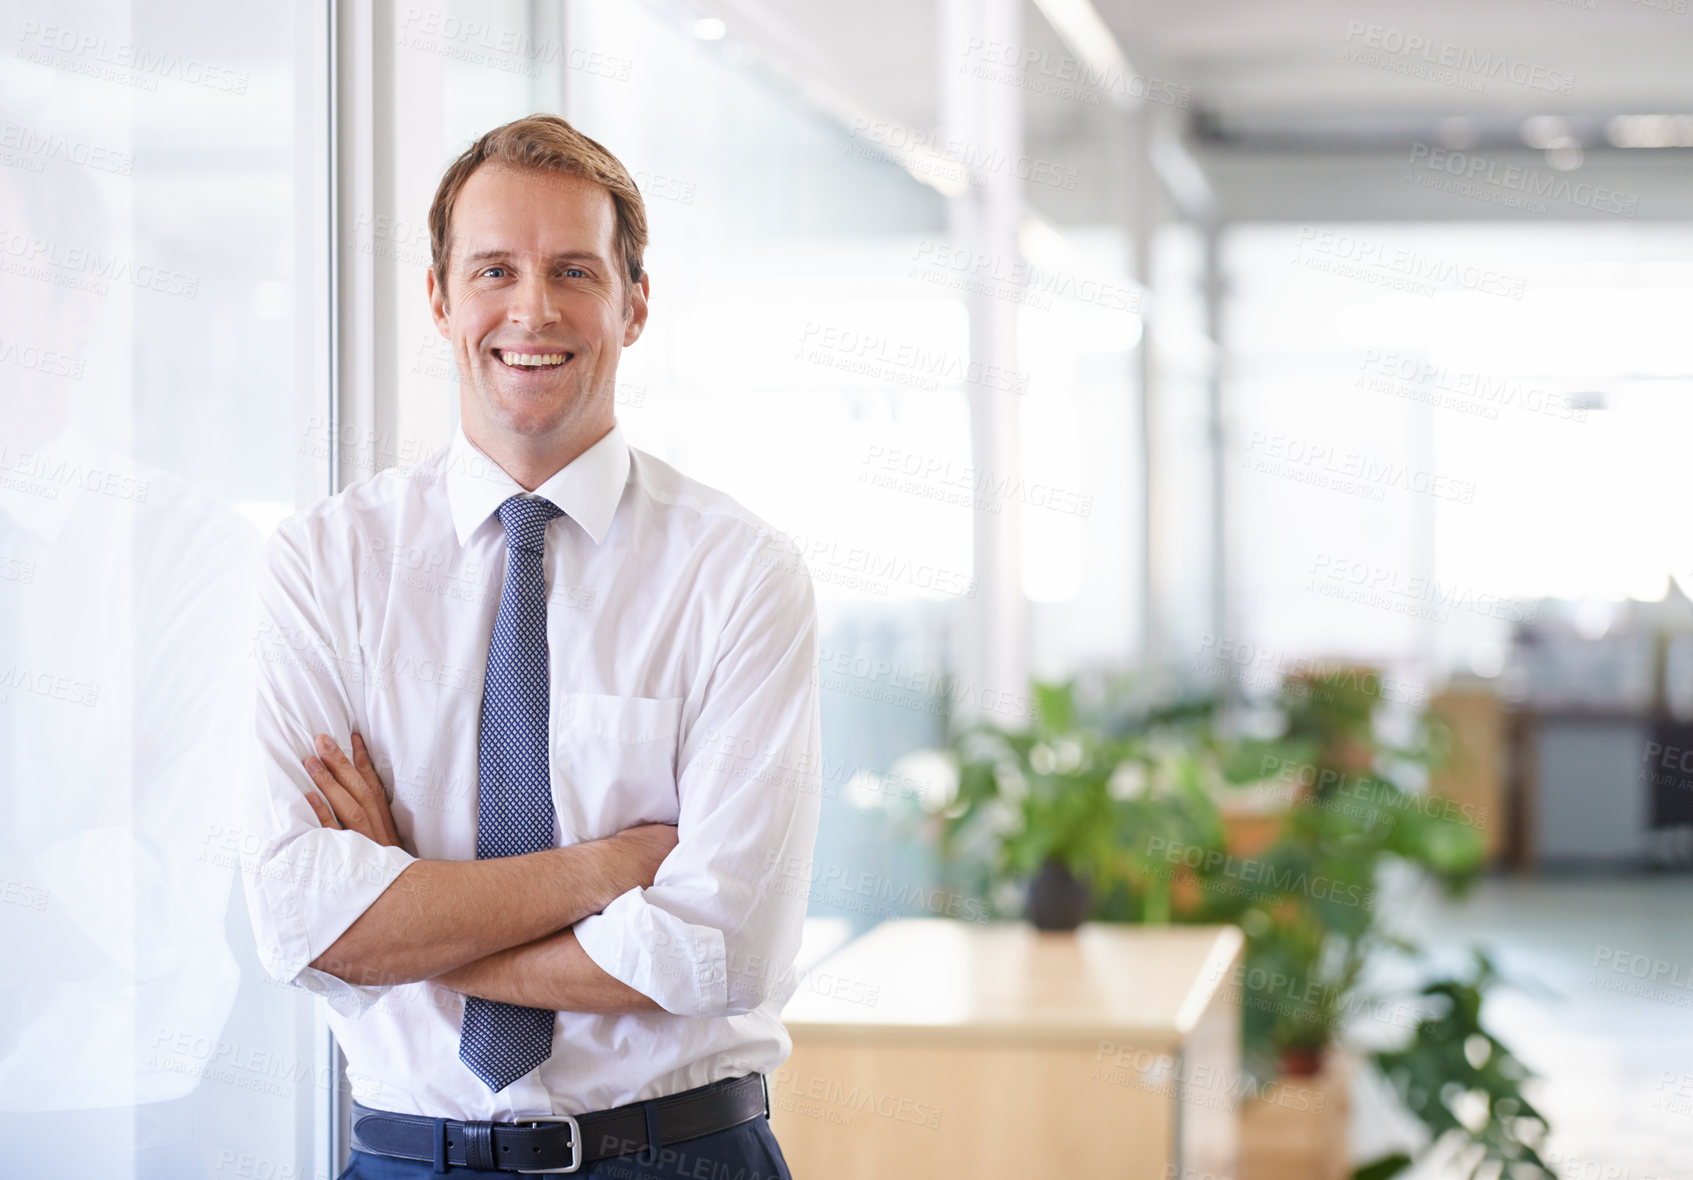 Buy stock photo Portrait of a handsome businessman leaning against a glass wall